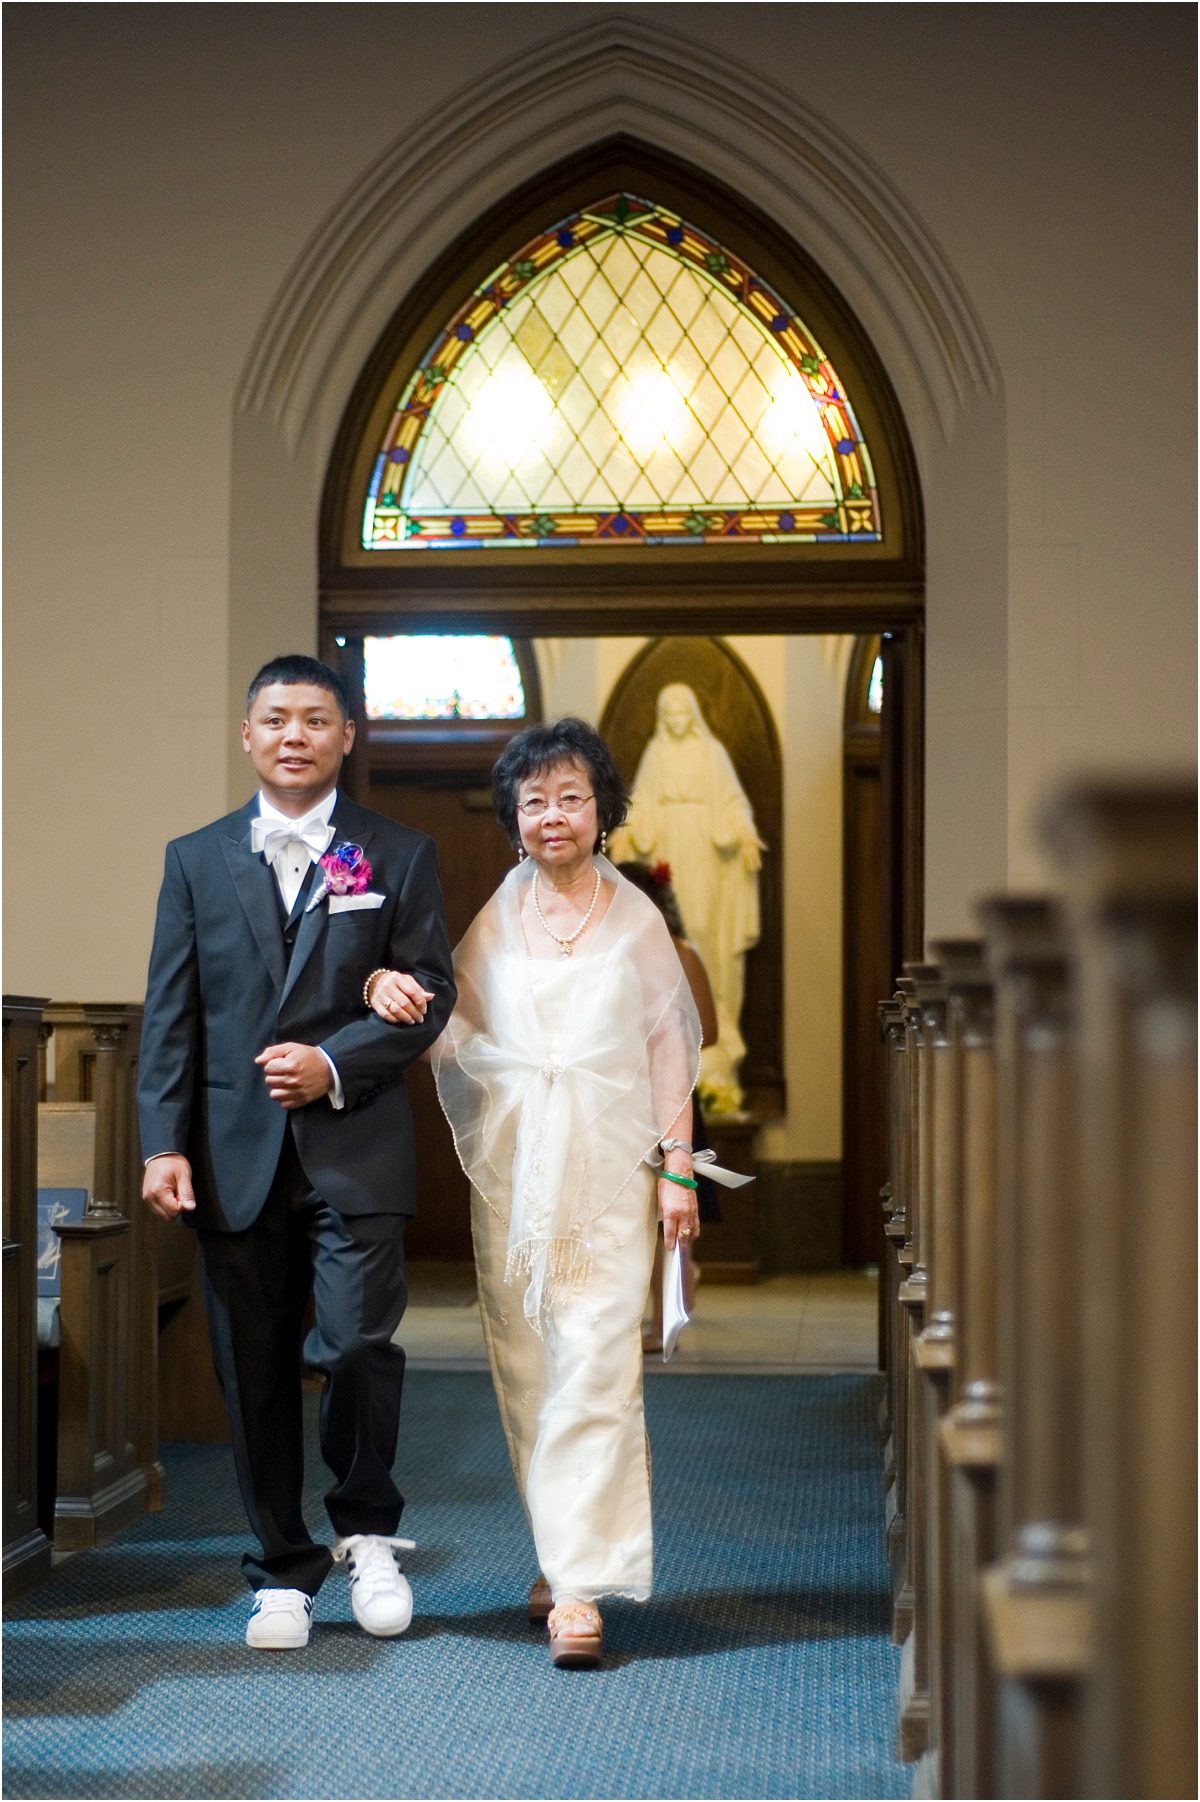 processional, mother of the groom and groom walking down the aisle, filipino,catholic church, ceremony, colorado wedding photographer